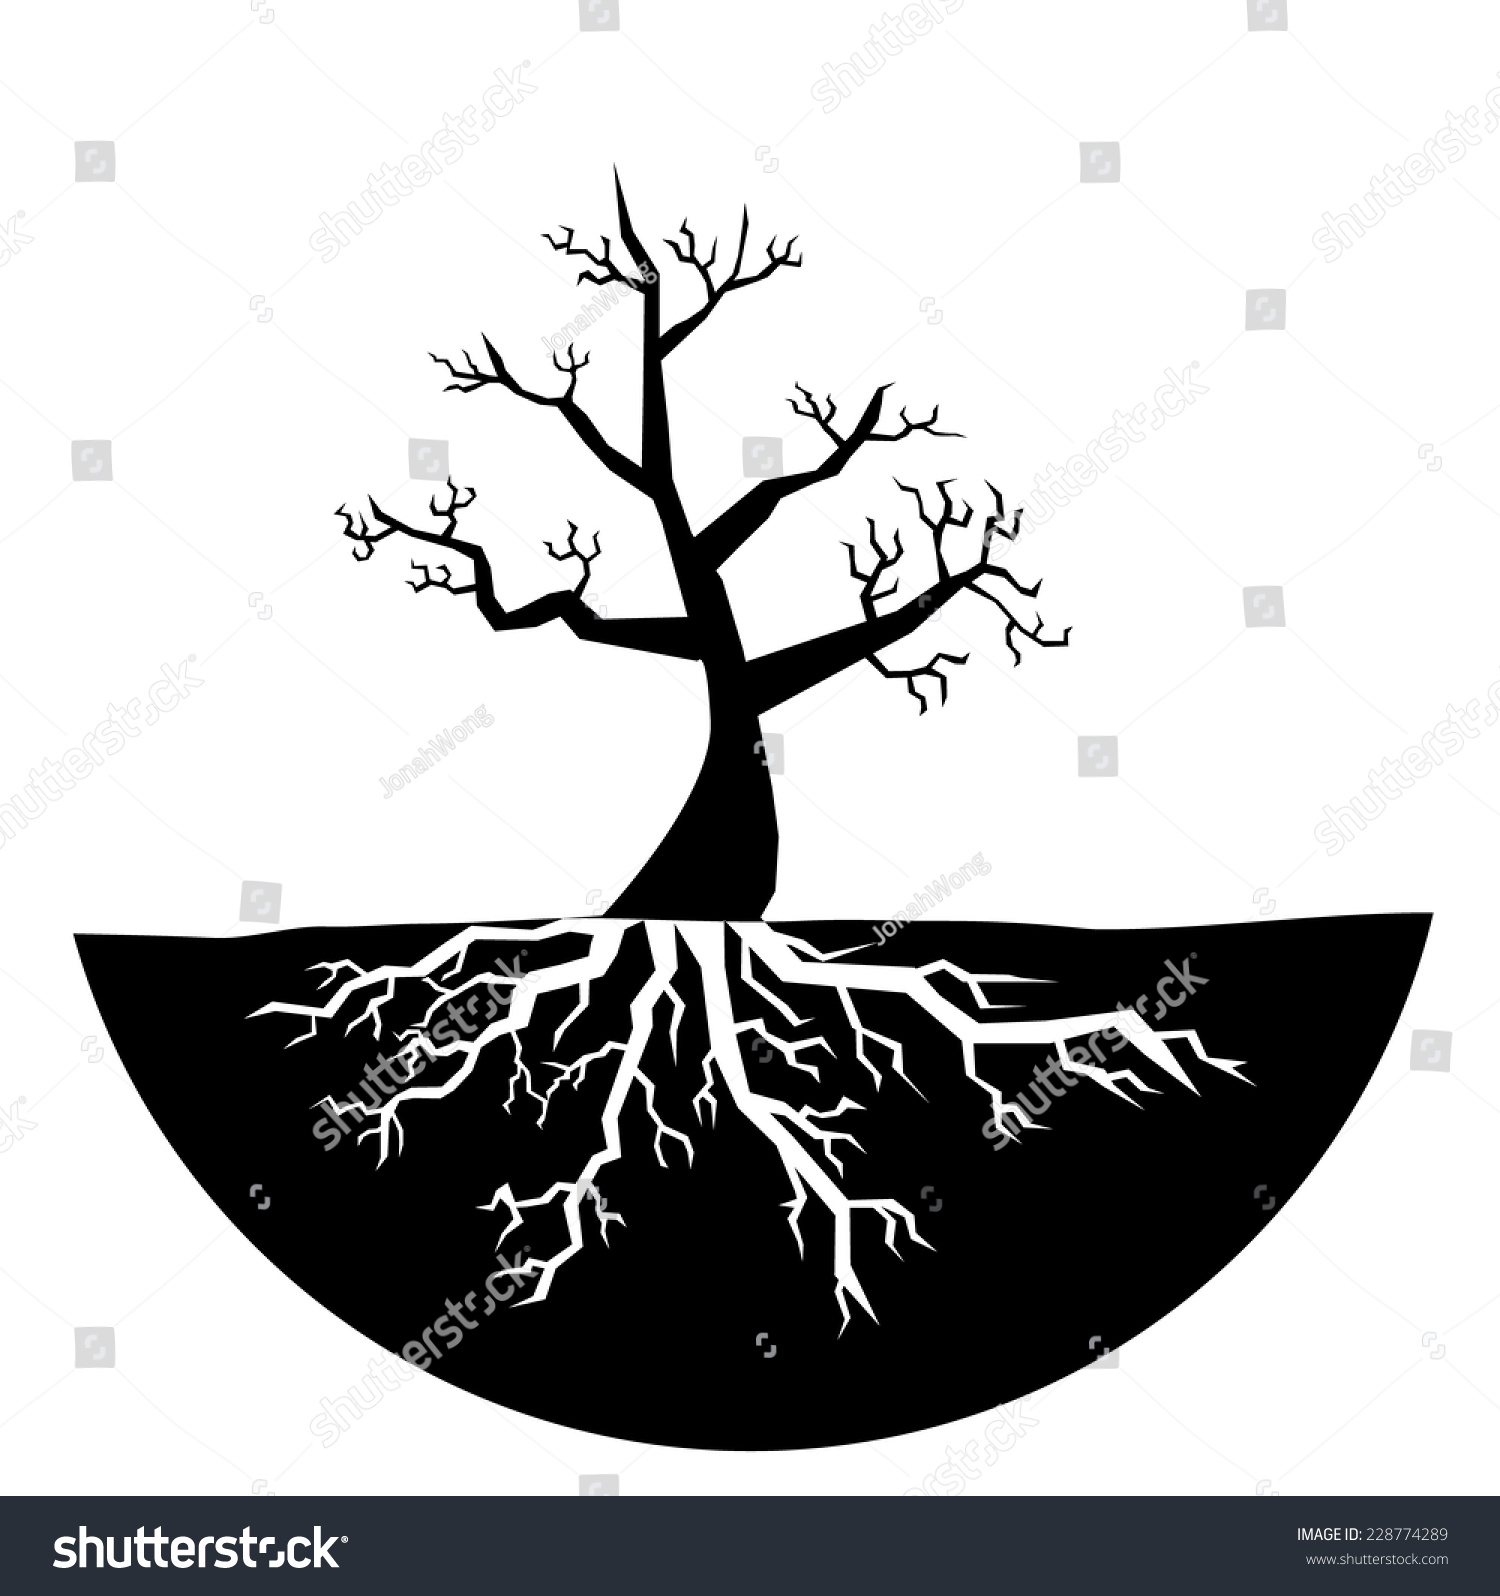 Silhouette Tree No Leaves Showing Roots Stock Vector 228774289